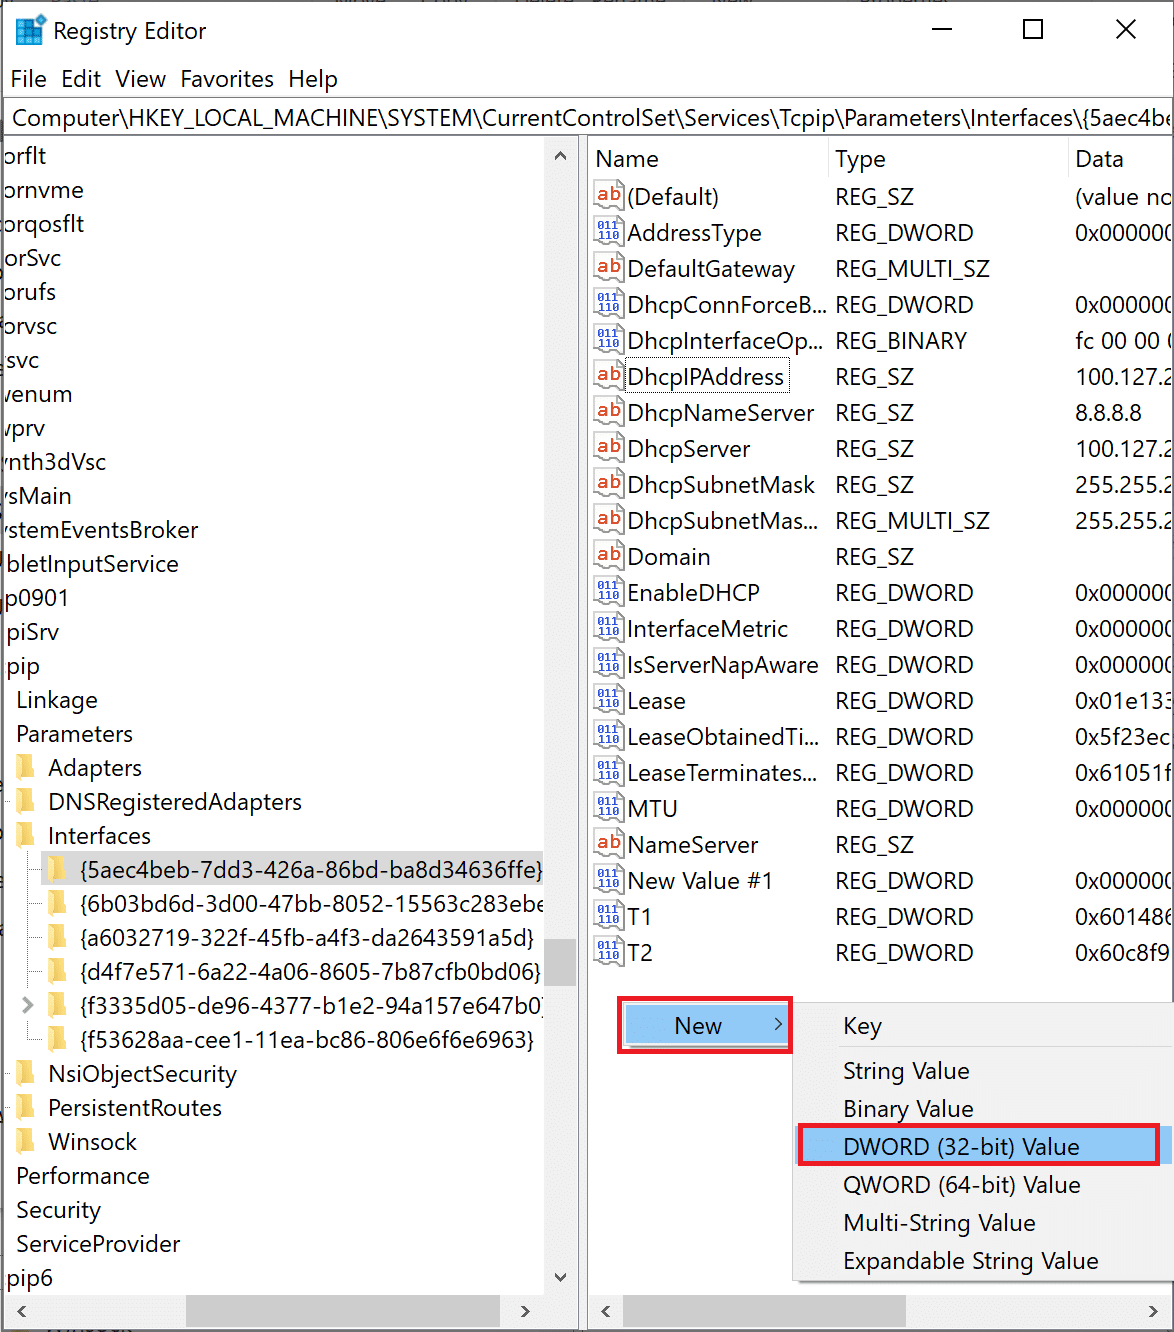 click New then DWORD(32-bit) Value. How to Optimize Windows 10 for Gaming and Performance?